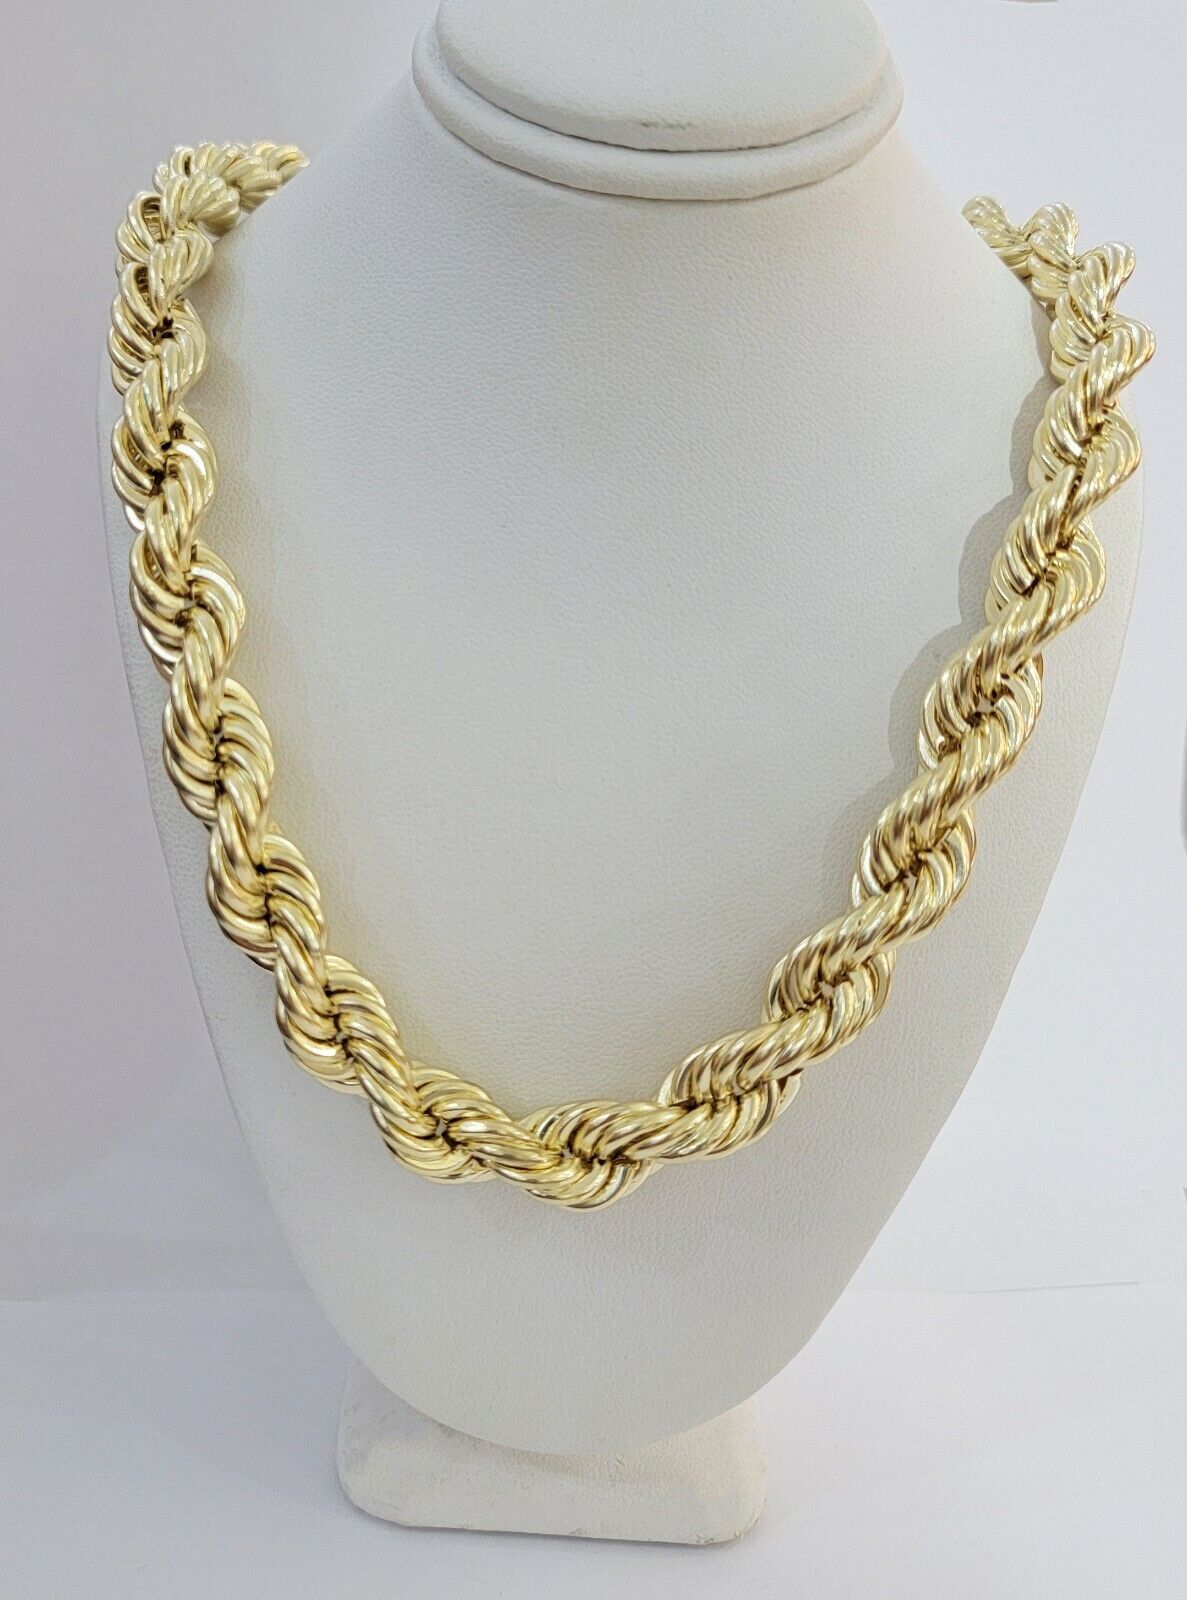 10k Gold Rope Chain Mens 22 Inch Necklace 12mm REAL 10kt Yellow Gold , Thick